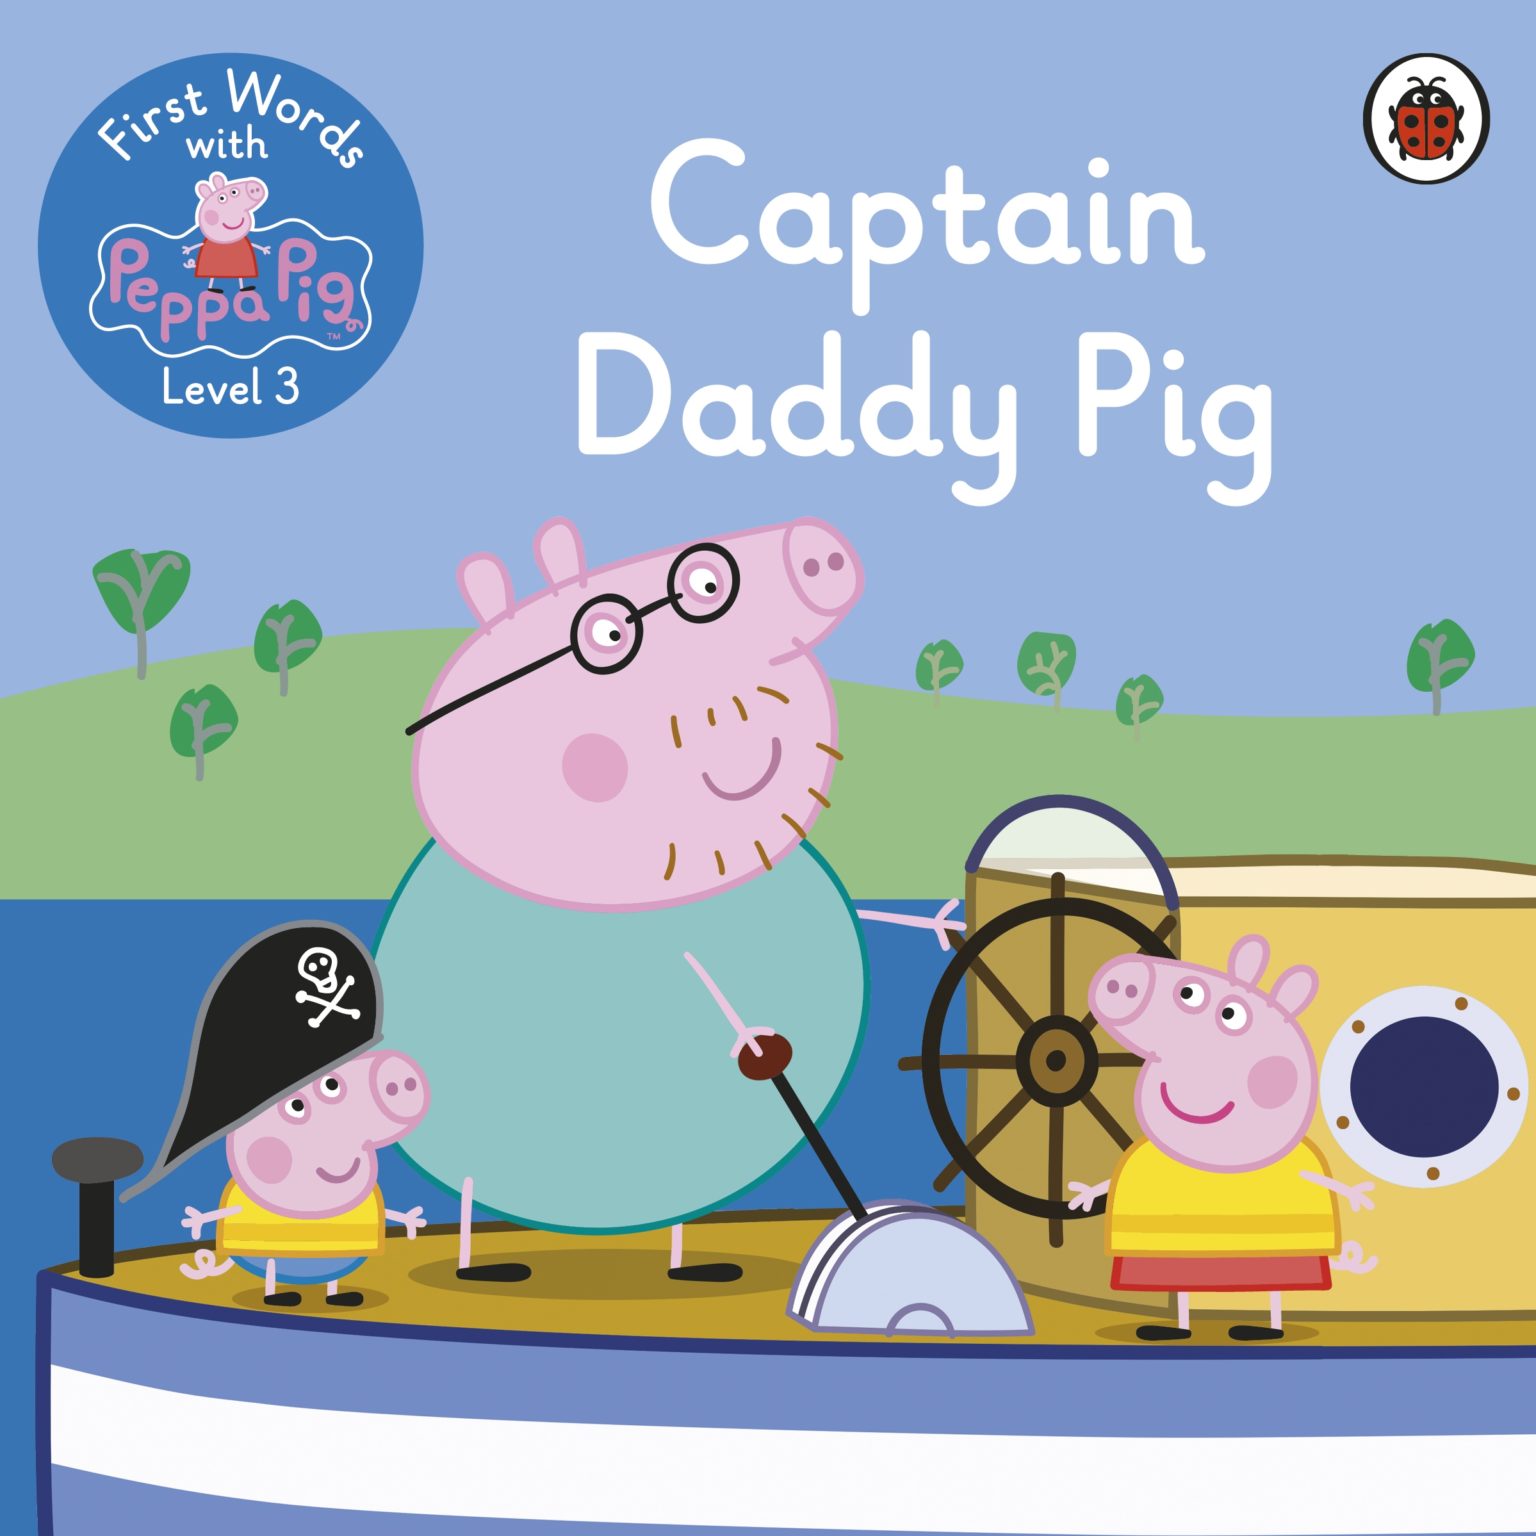 First Words with Peppa Pig: Level 3 Captain Daddy Pig